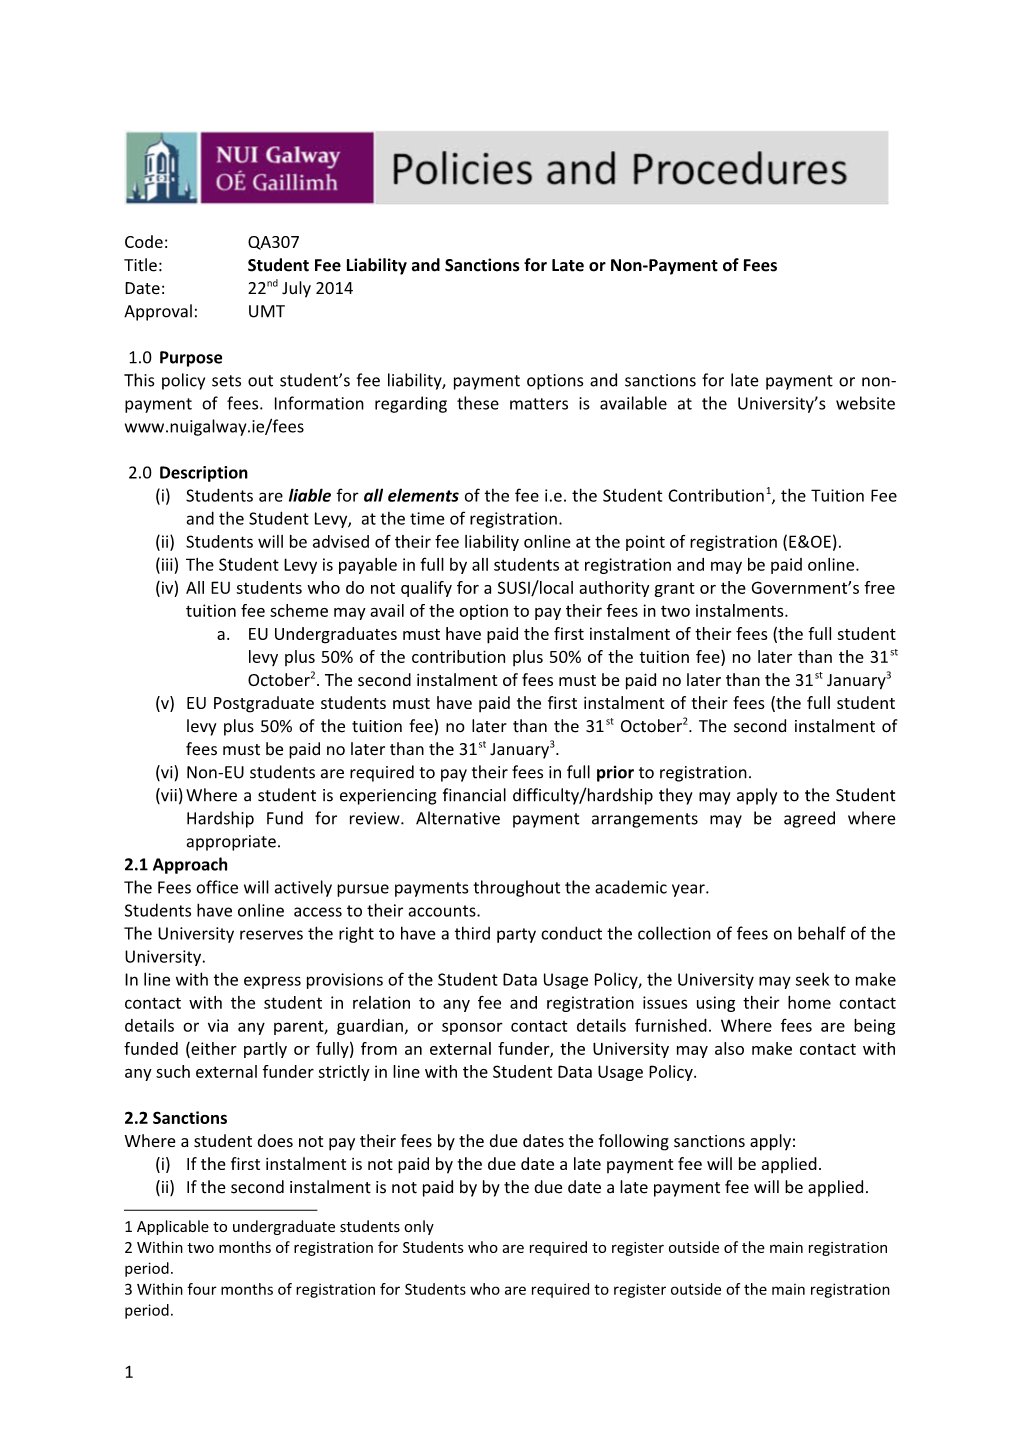 Title: Student Fee Liability and Sanctions for Late Or Non-Payment of Fees